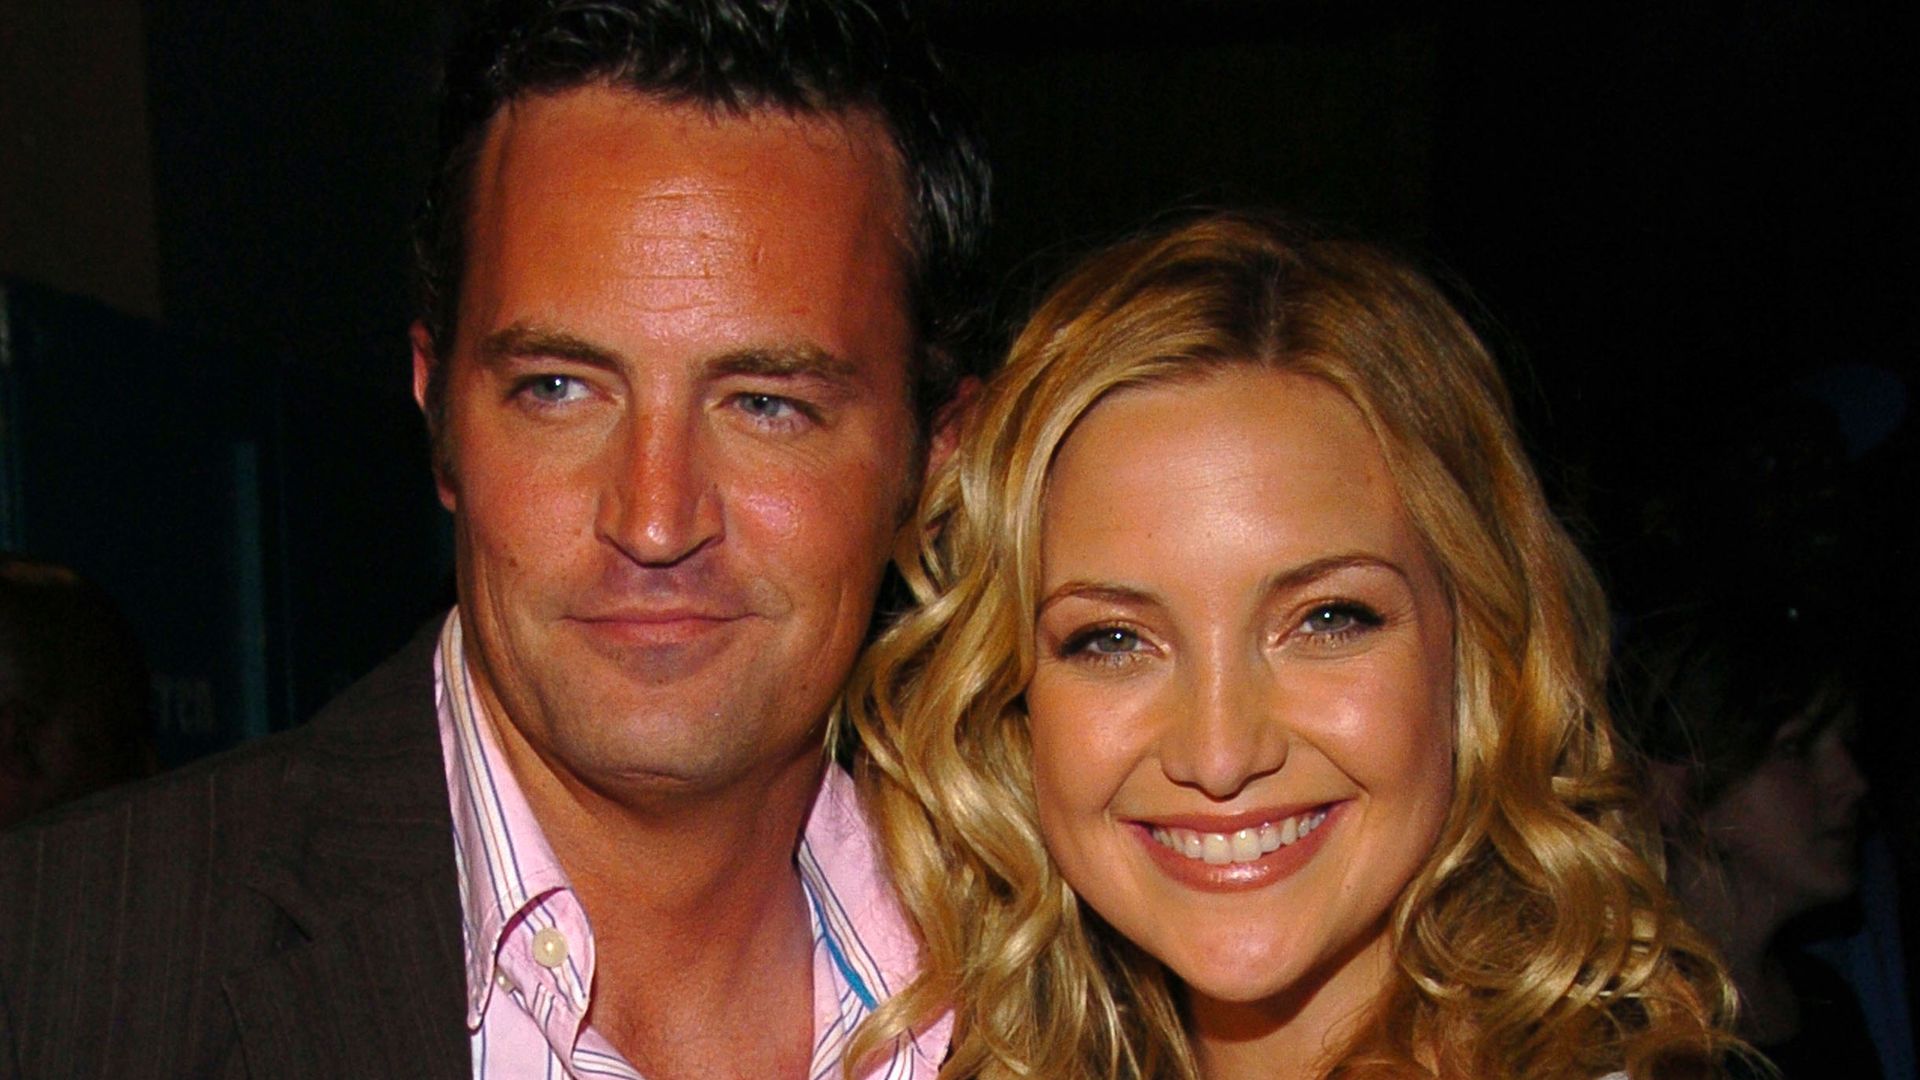 Matthew Perry and Kate Hudson MTV movie awards 2004